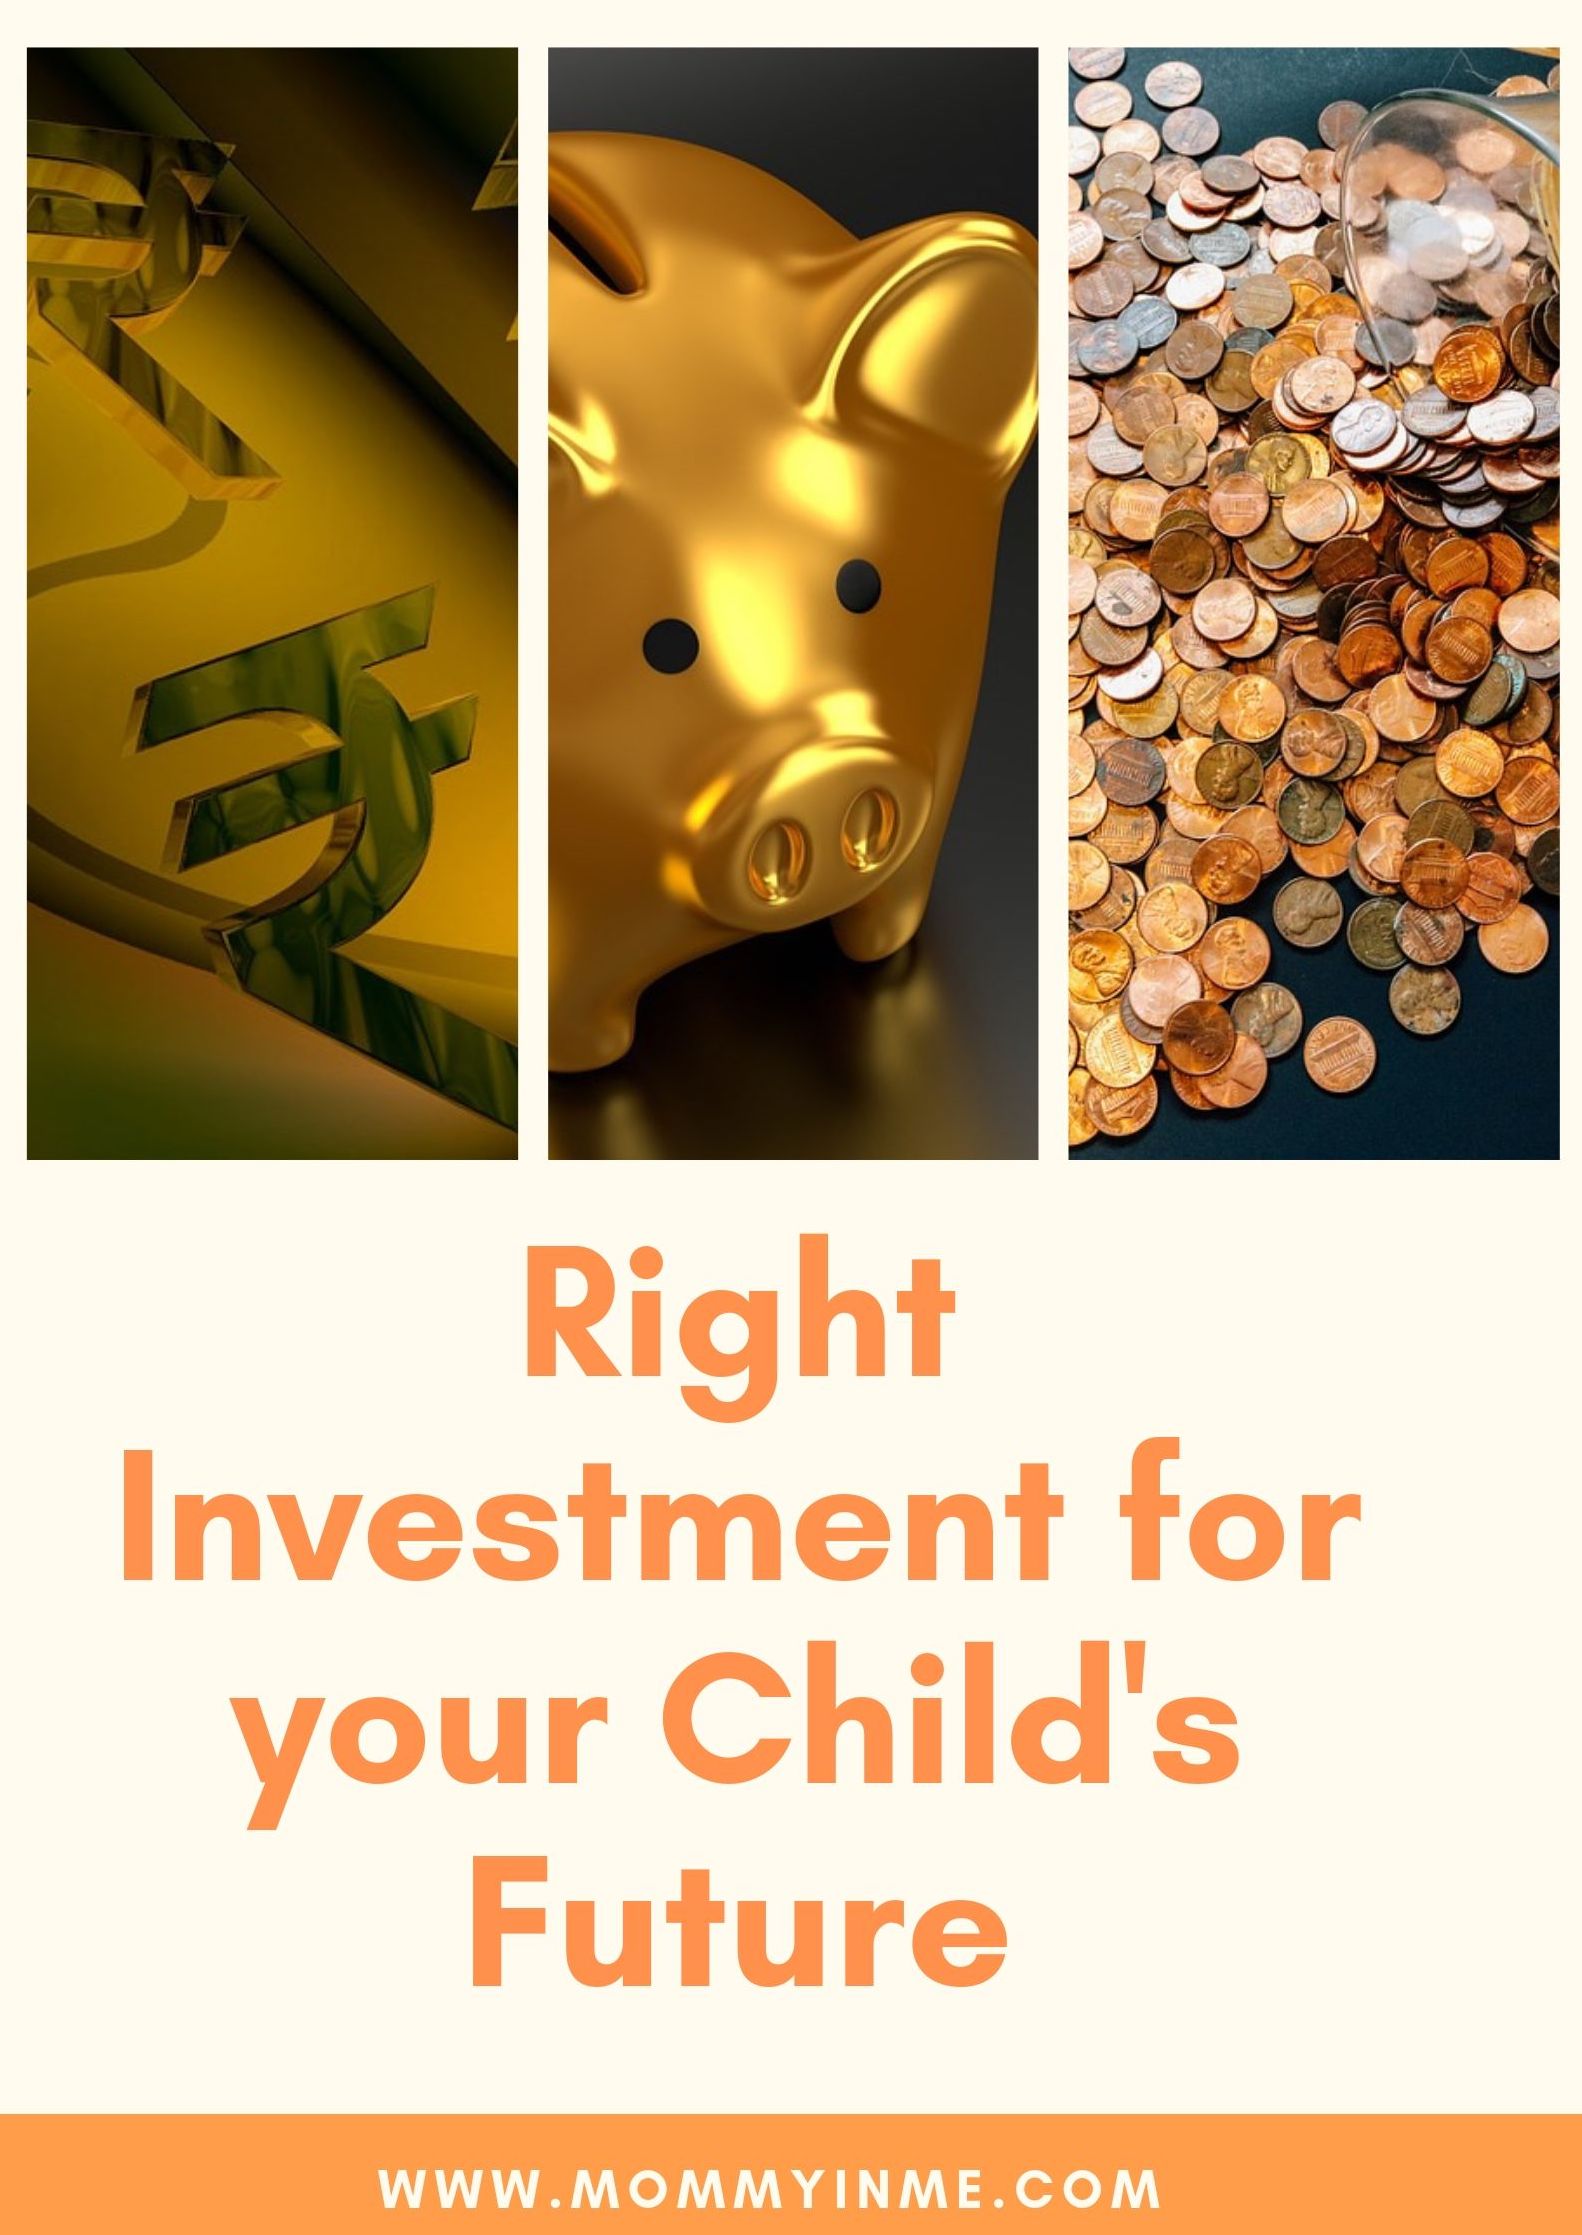 With the way Inflation is trending, to give our children a good future, it is very important to have the right Investment and save for your child's future. #investment #futureplanning #saving #childsfuture #savingforkids #rightinvestment #PPF #sukanyasamriddhischeme #childplans #childschemes #equitymutualfunds #mutualfunds #terminsurance #reliancelifeinsurance